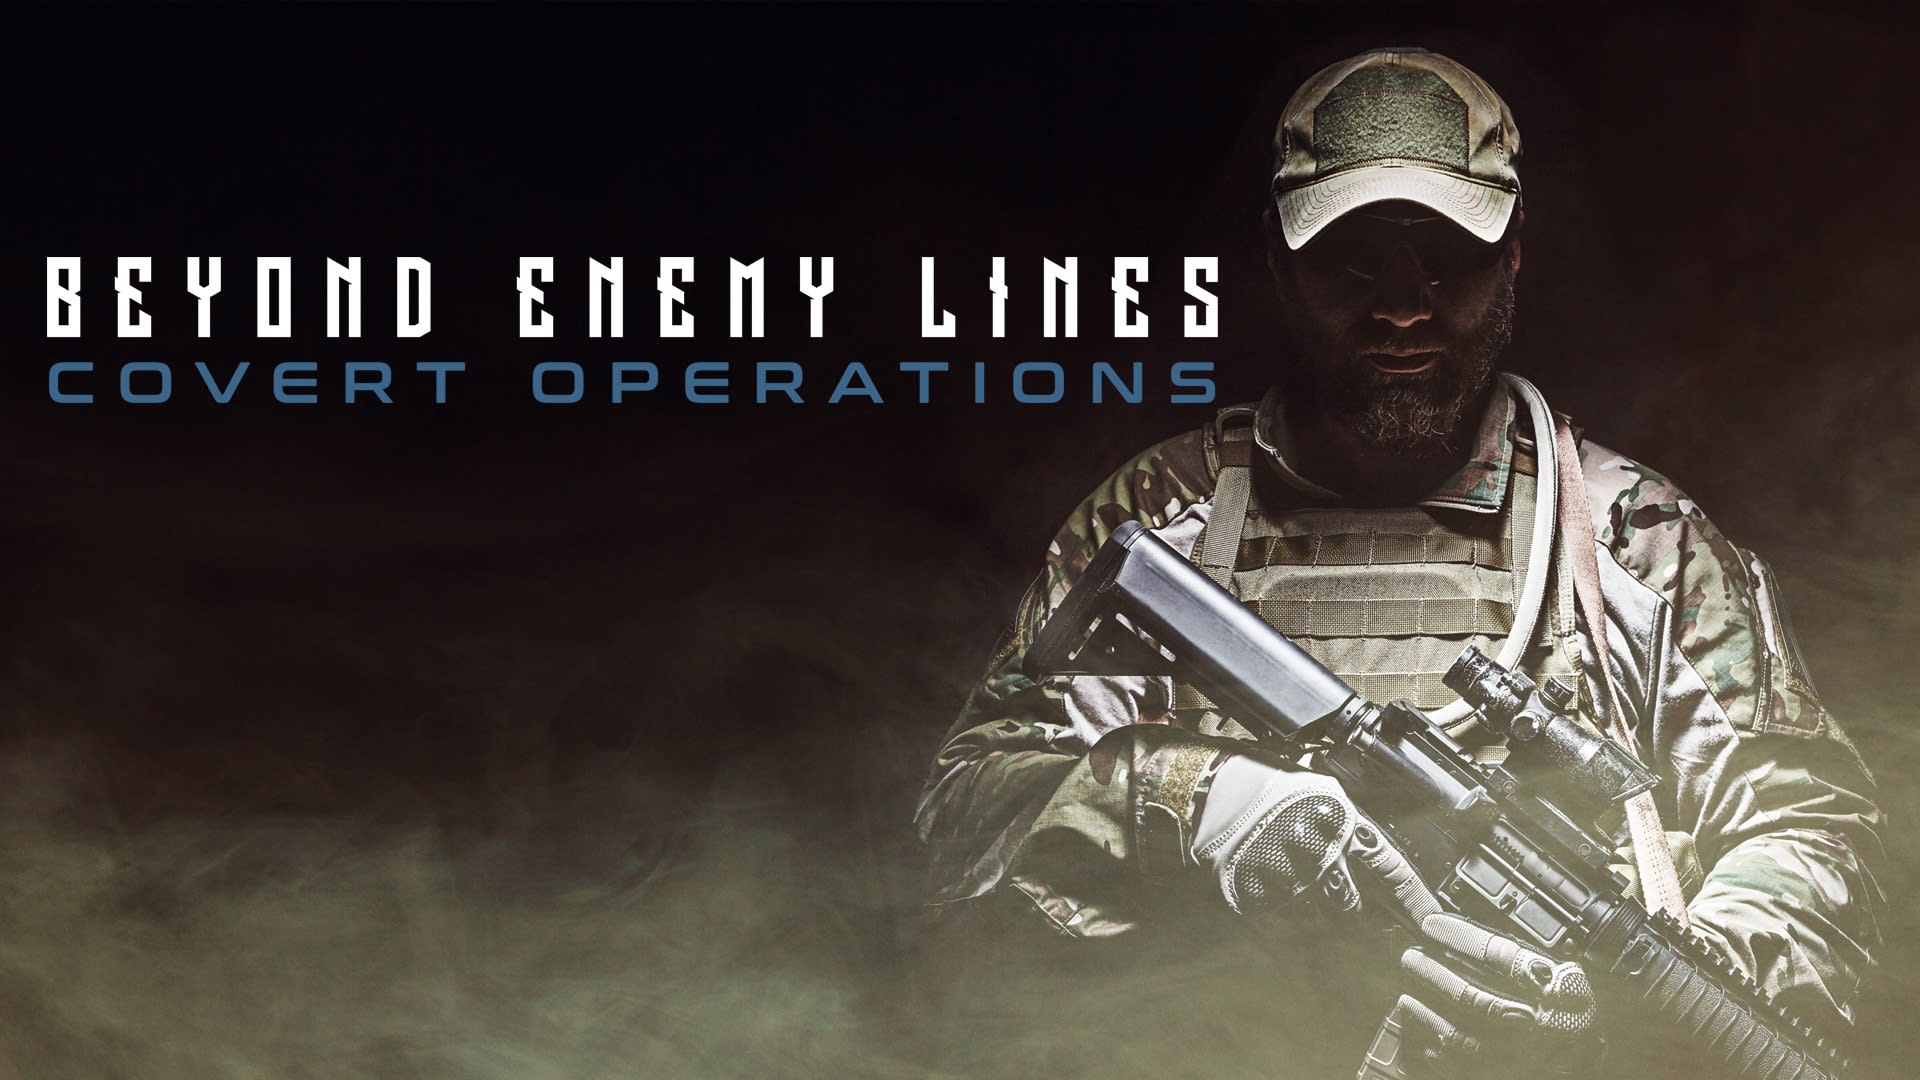 Beyond Enemy Lines: Covert Operations